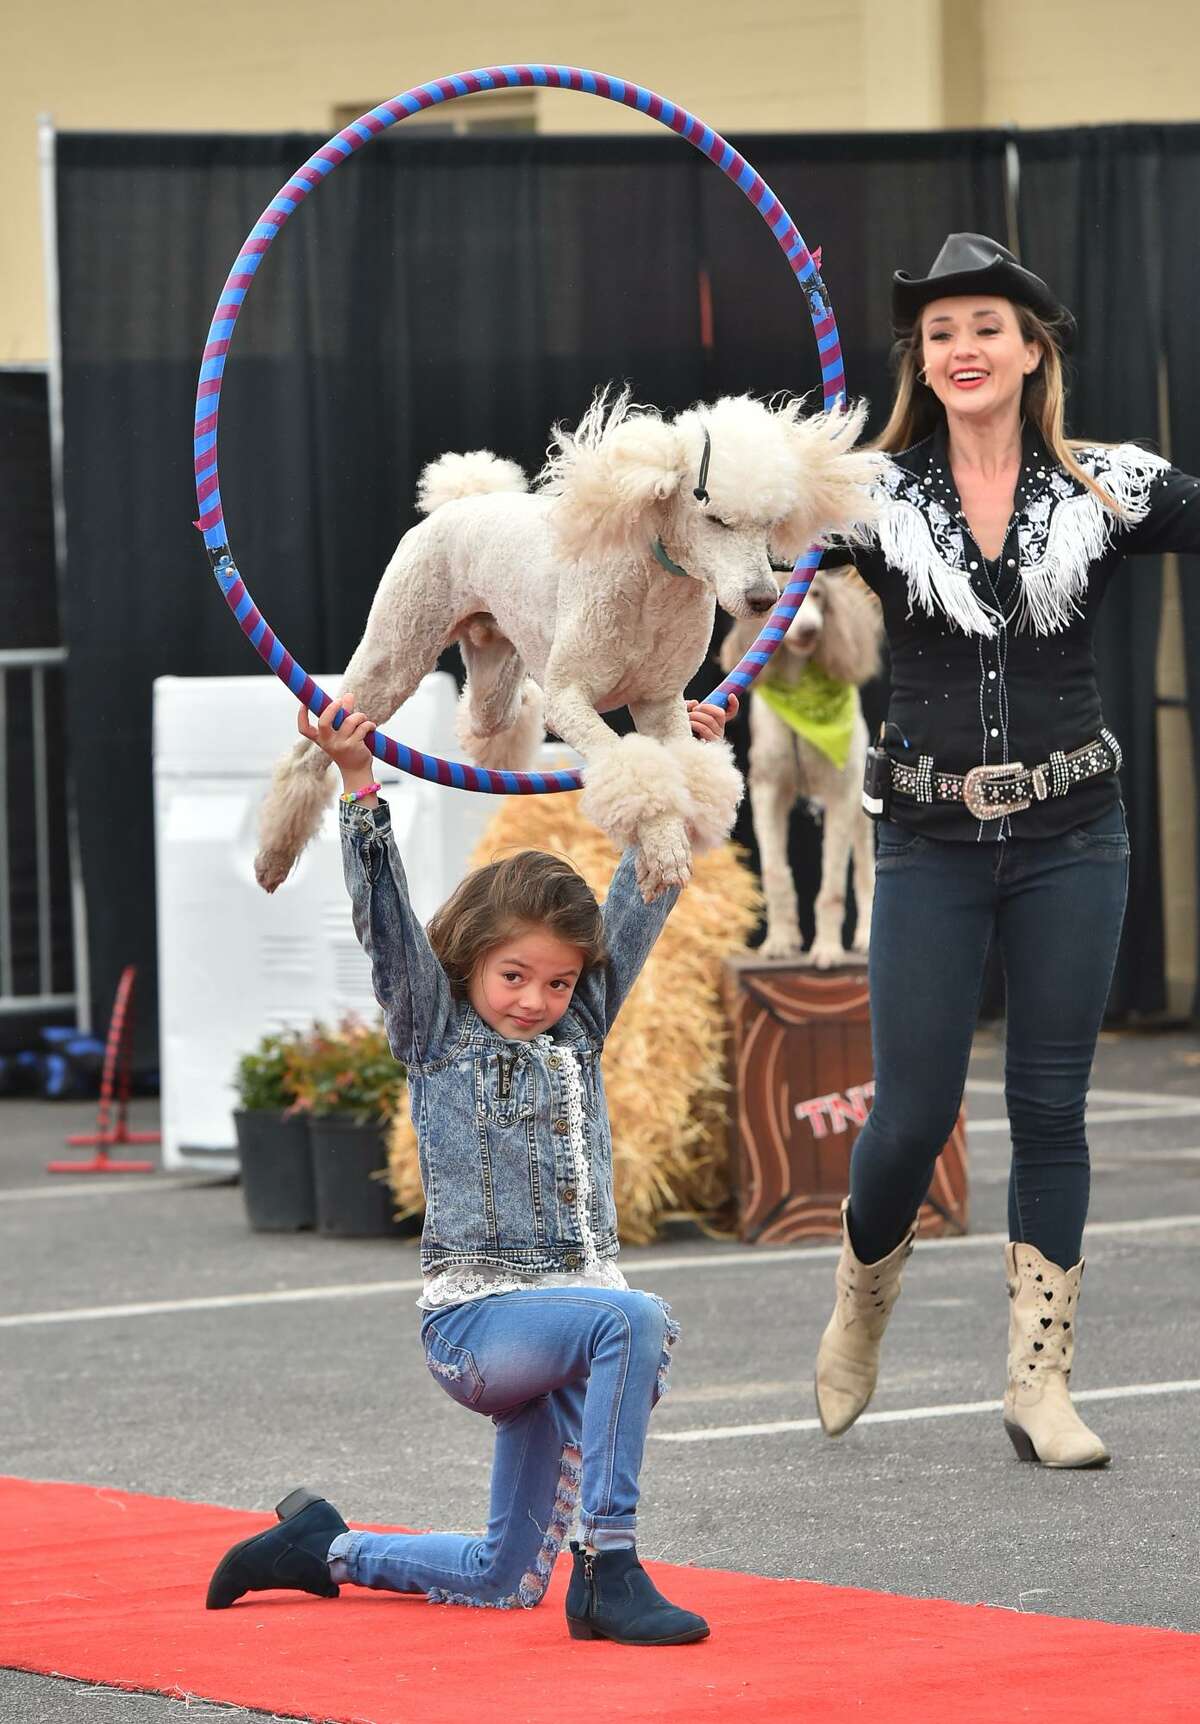 Katerina Pompeyo has a show poodle soar over her head as her mother, Natalya Pompeyo looks on. The Pompeyo Family Dog Show is one of the new attractions at this year's San Antonio Stock Show & Rodeo. The show, which has toured in the U.S., Canada and the Caribbean, is running through Tuesday at the Family Fair area.